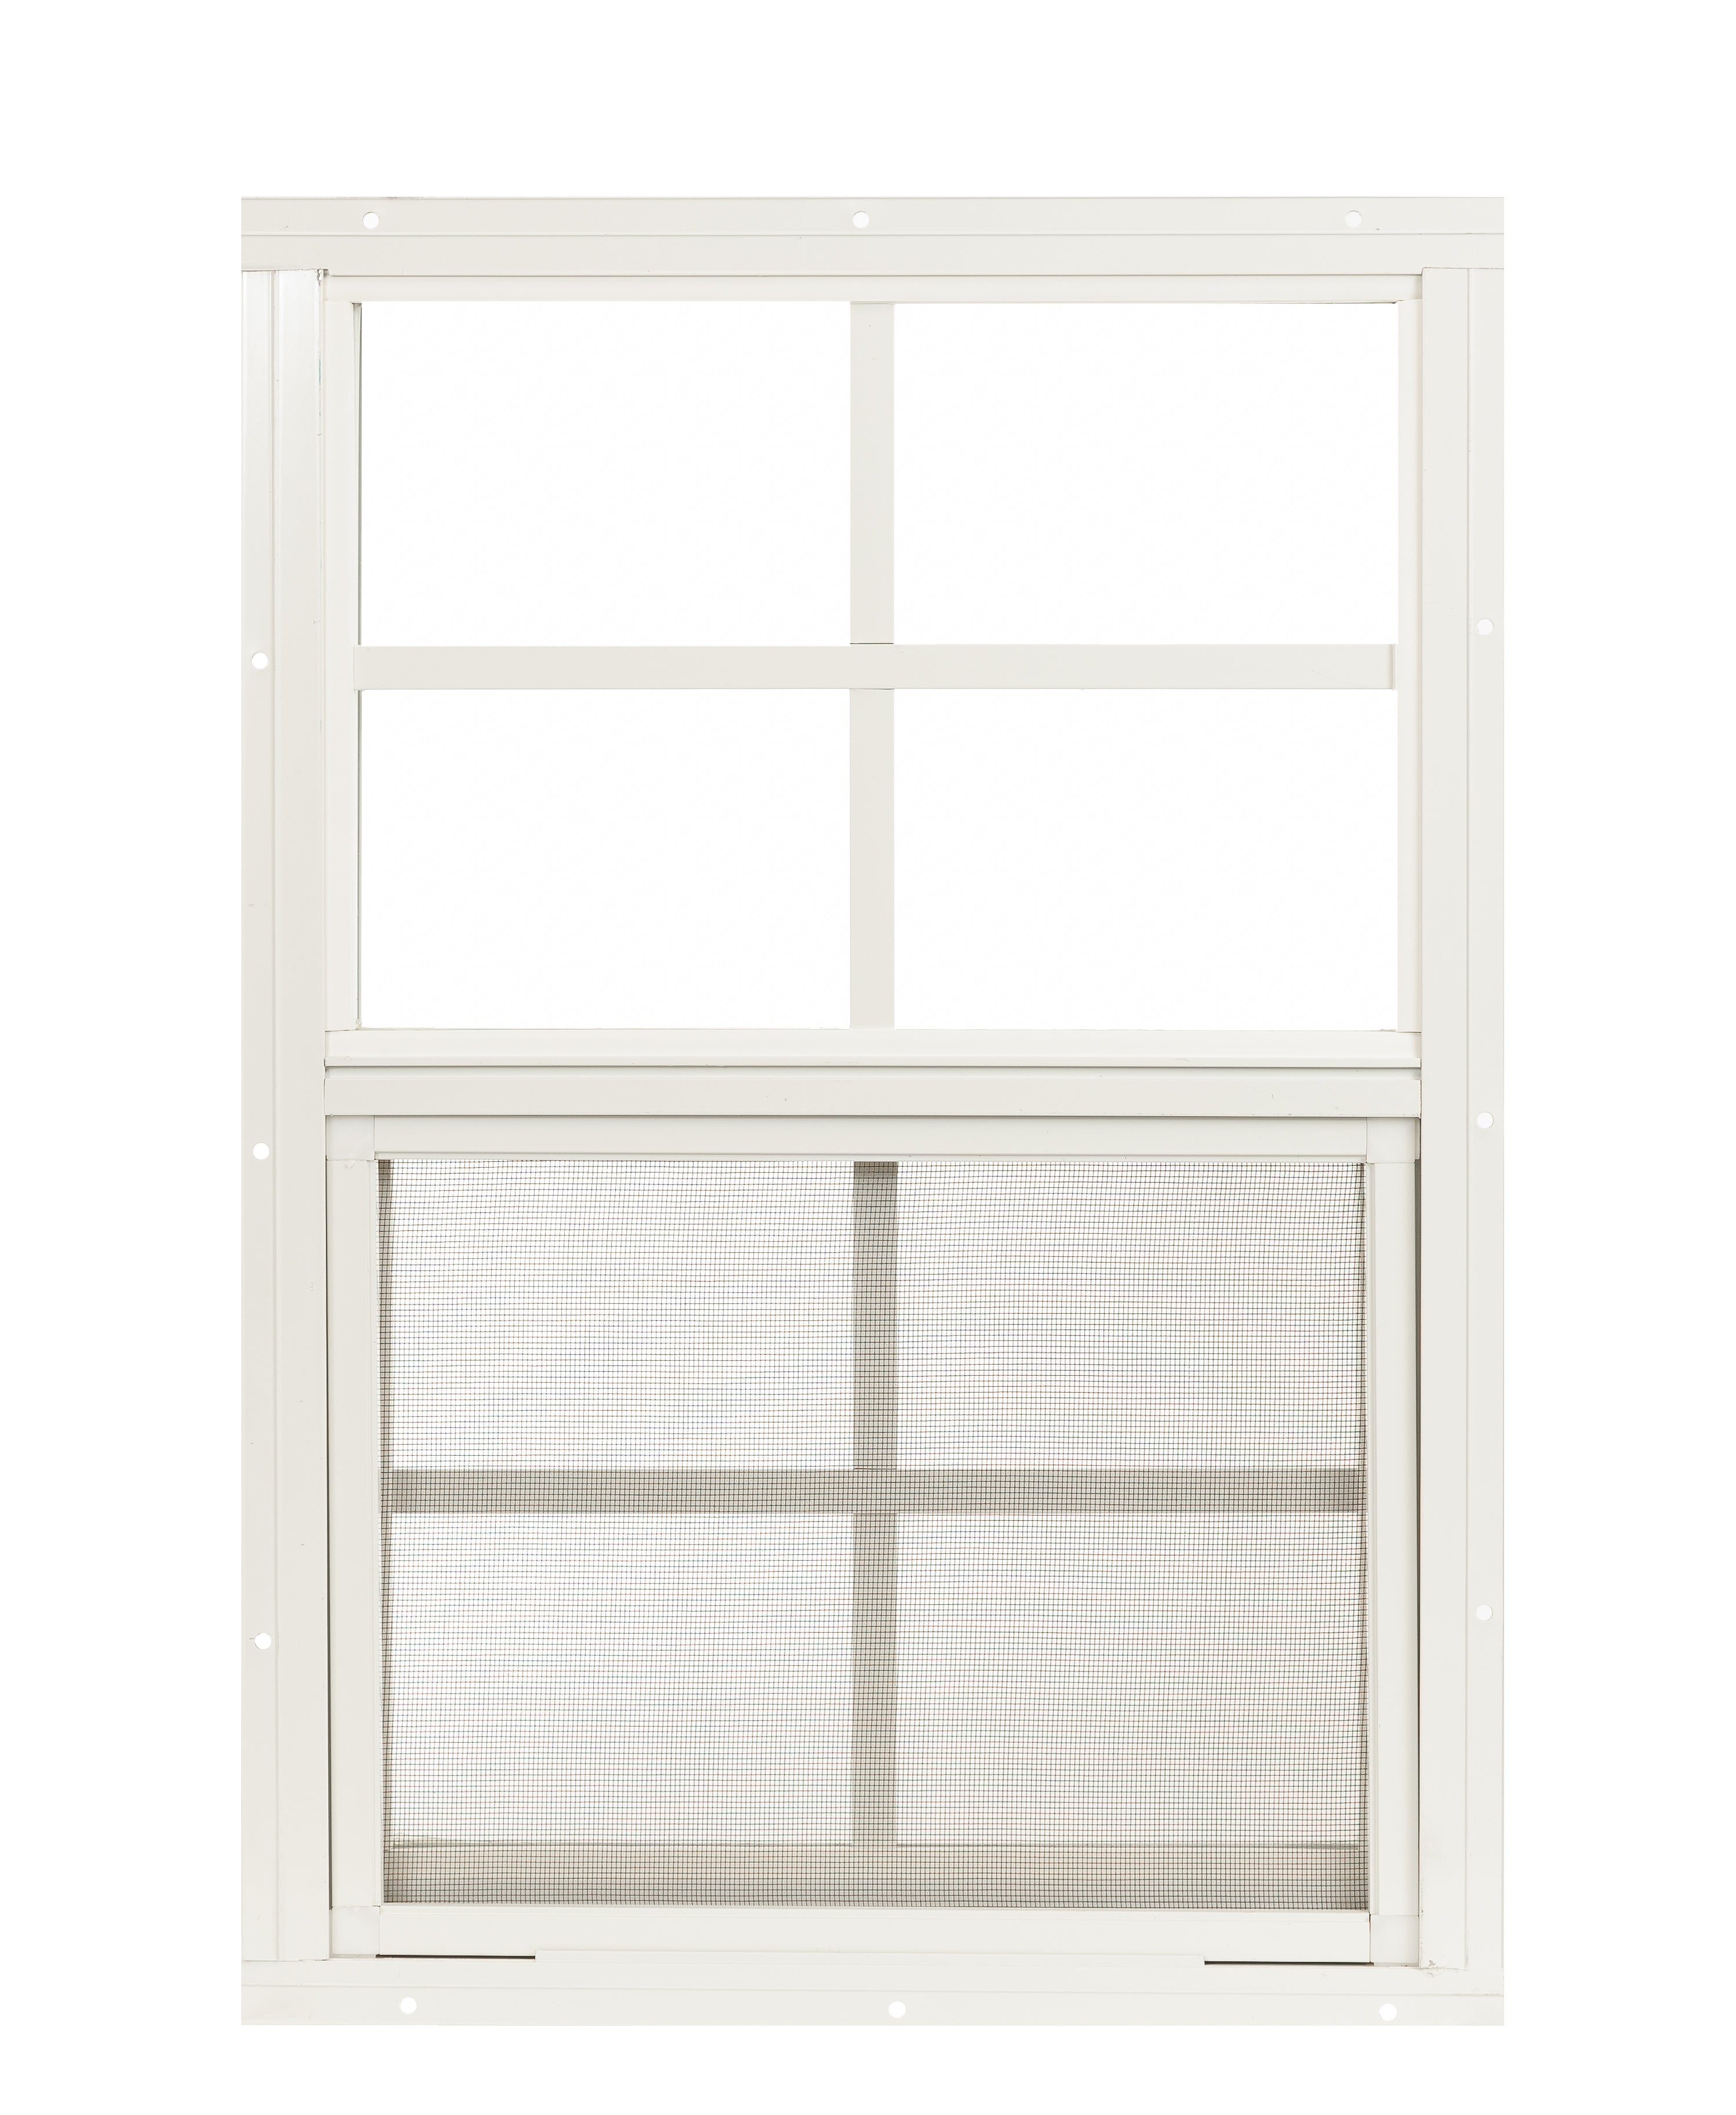 14" W x 21" H Single Hung Flush Mount White Window for Sheds, Playhouses, and MORE